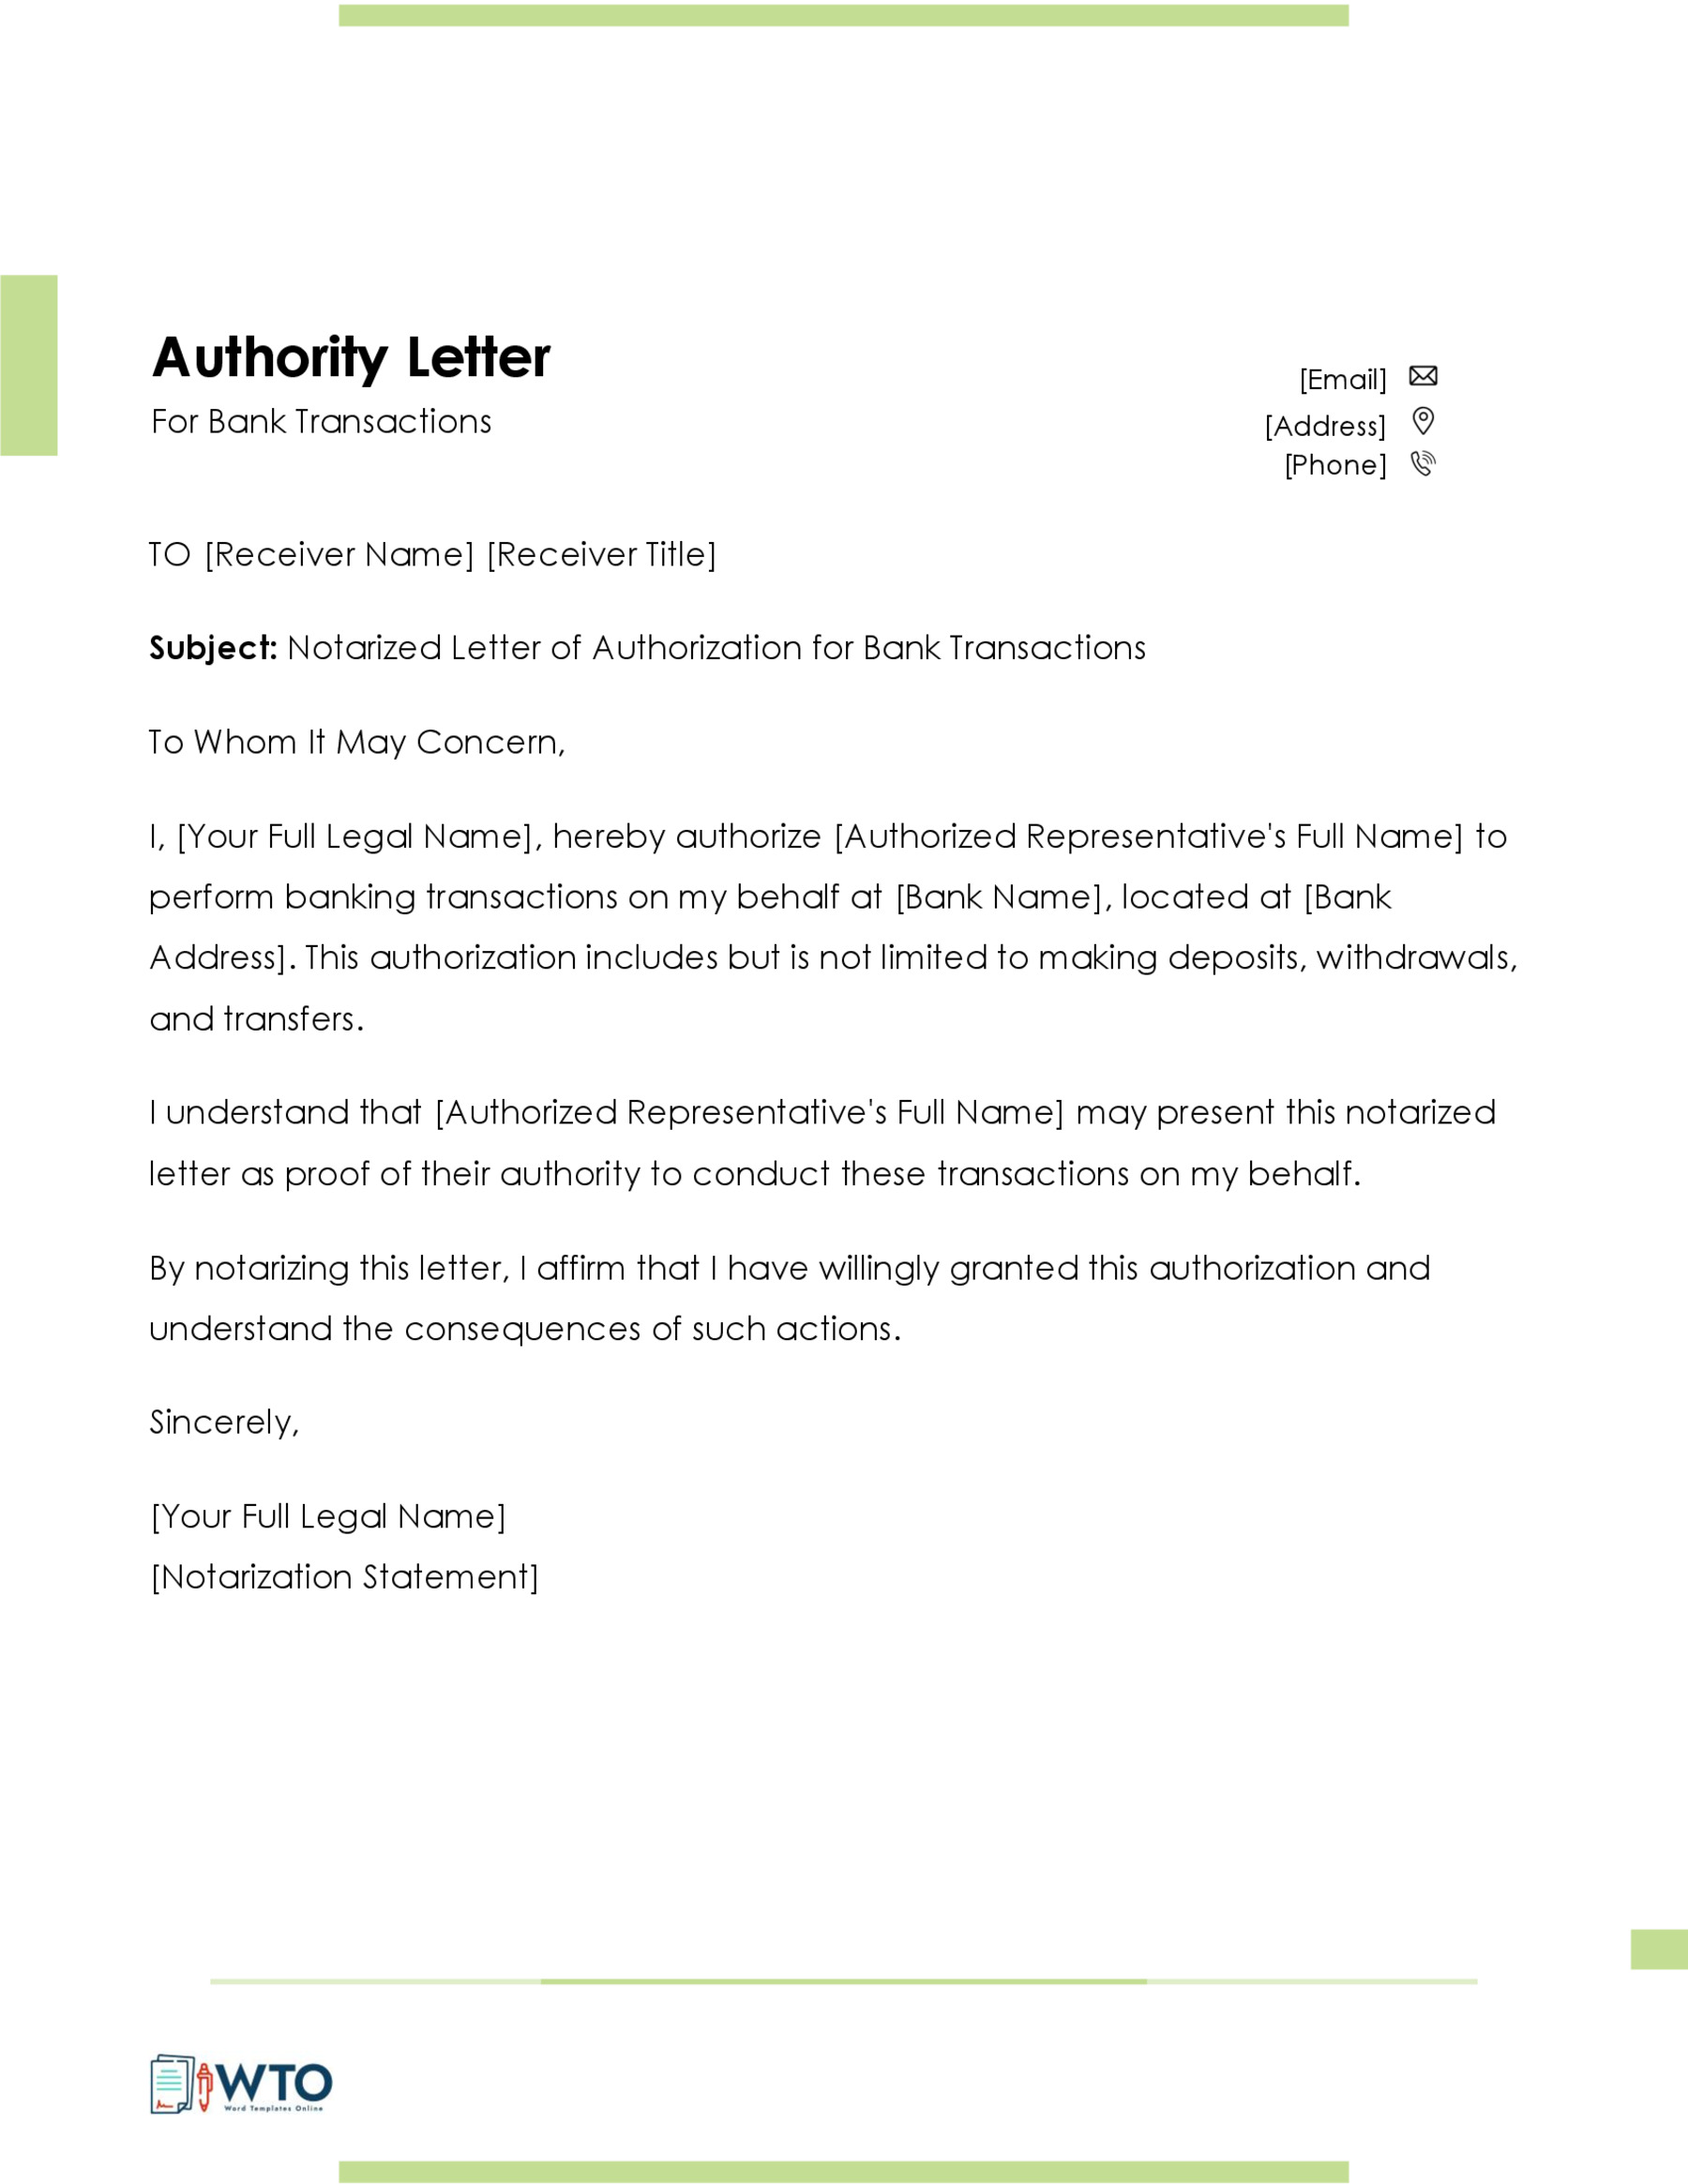 Notarized letter of authorization tamplate-Word Format